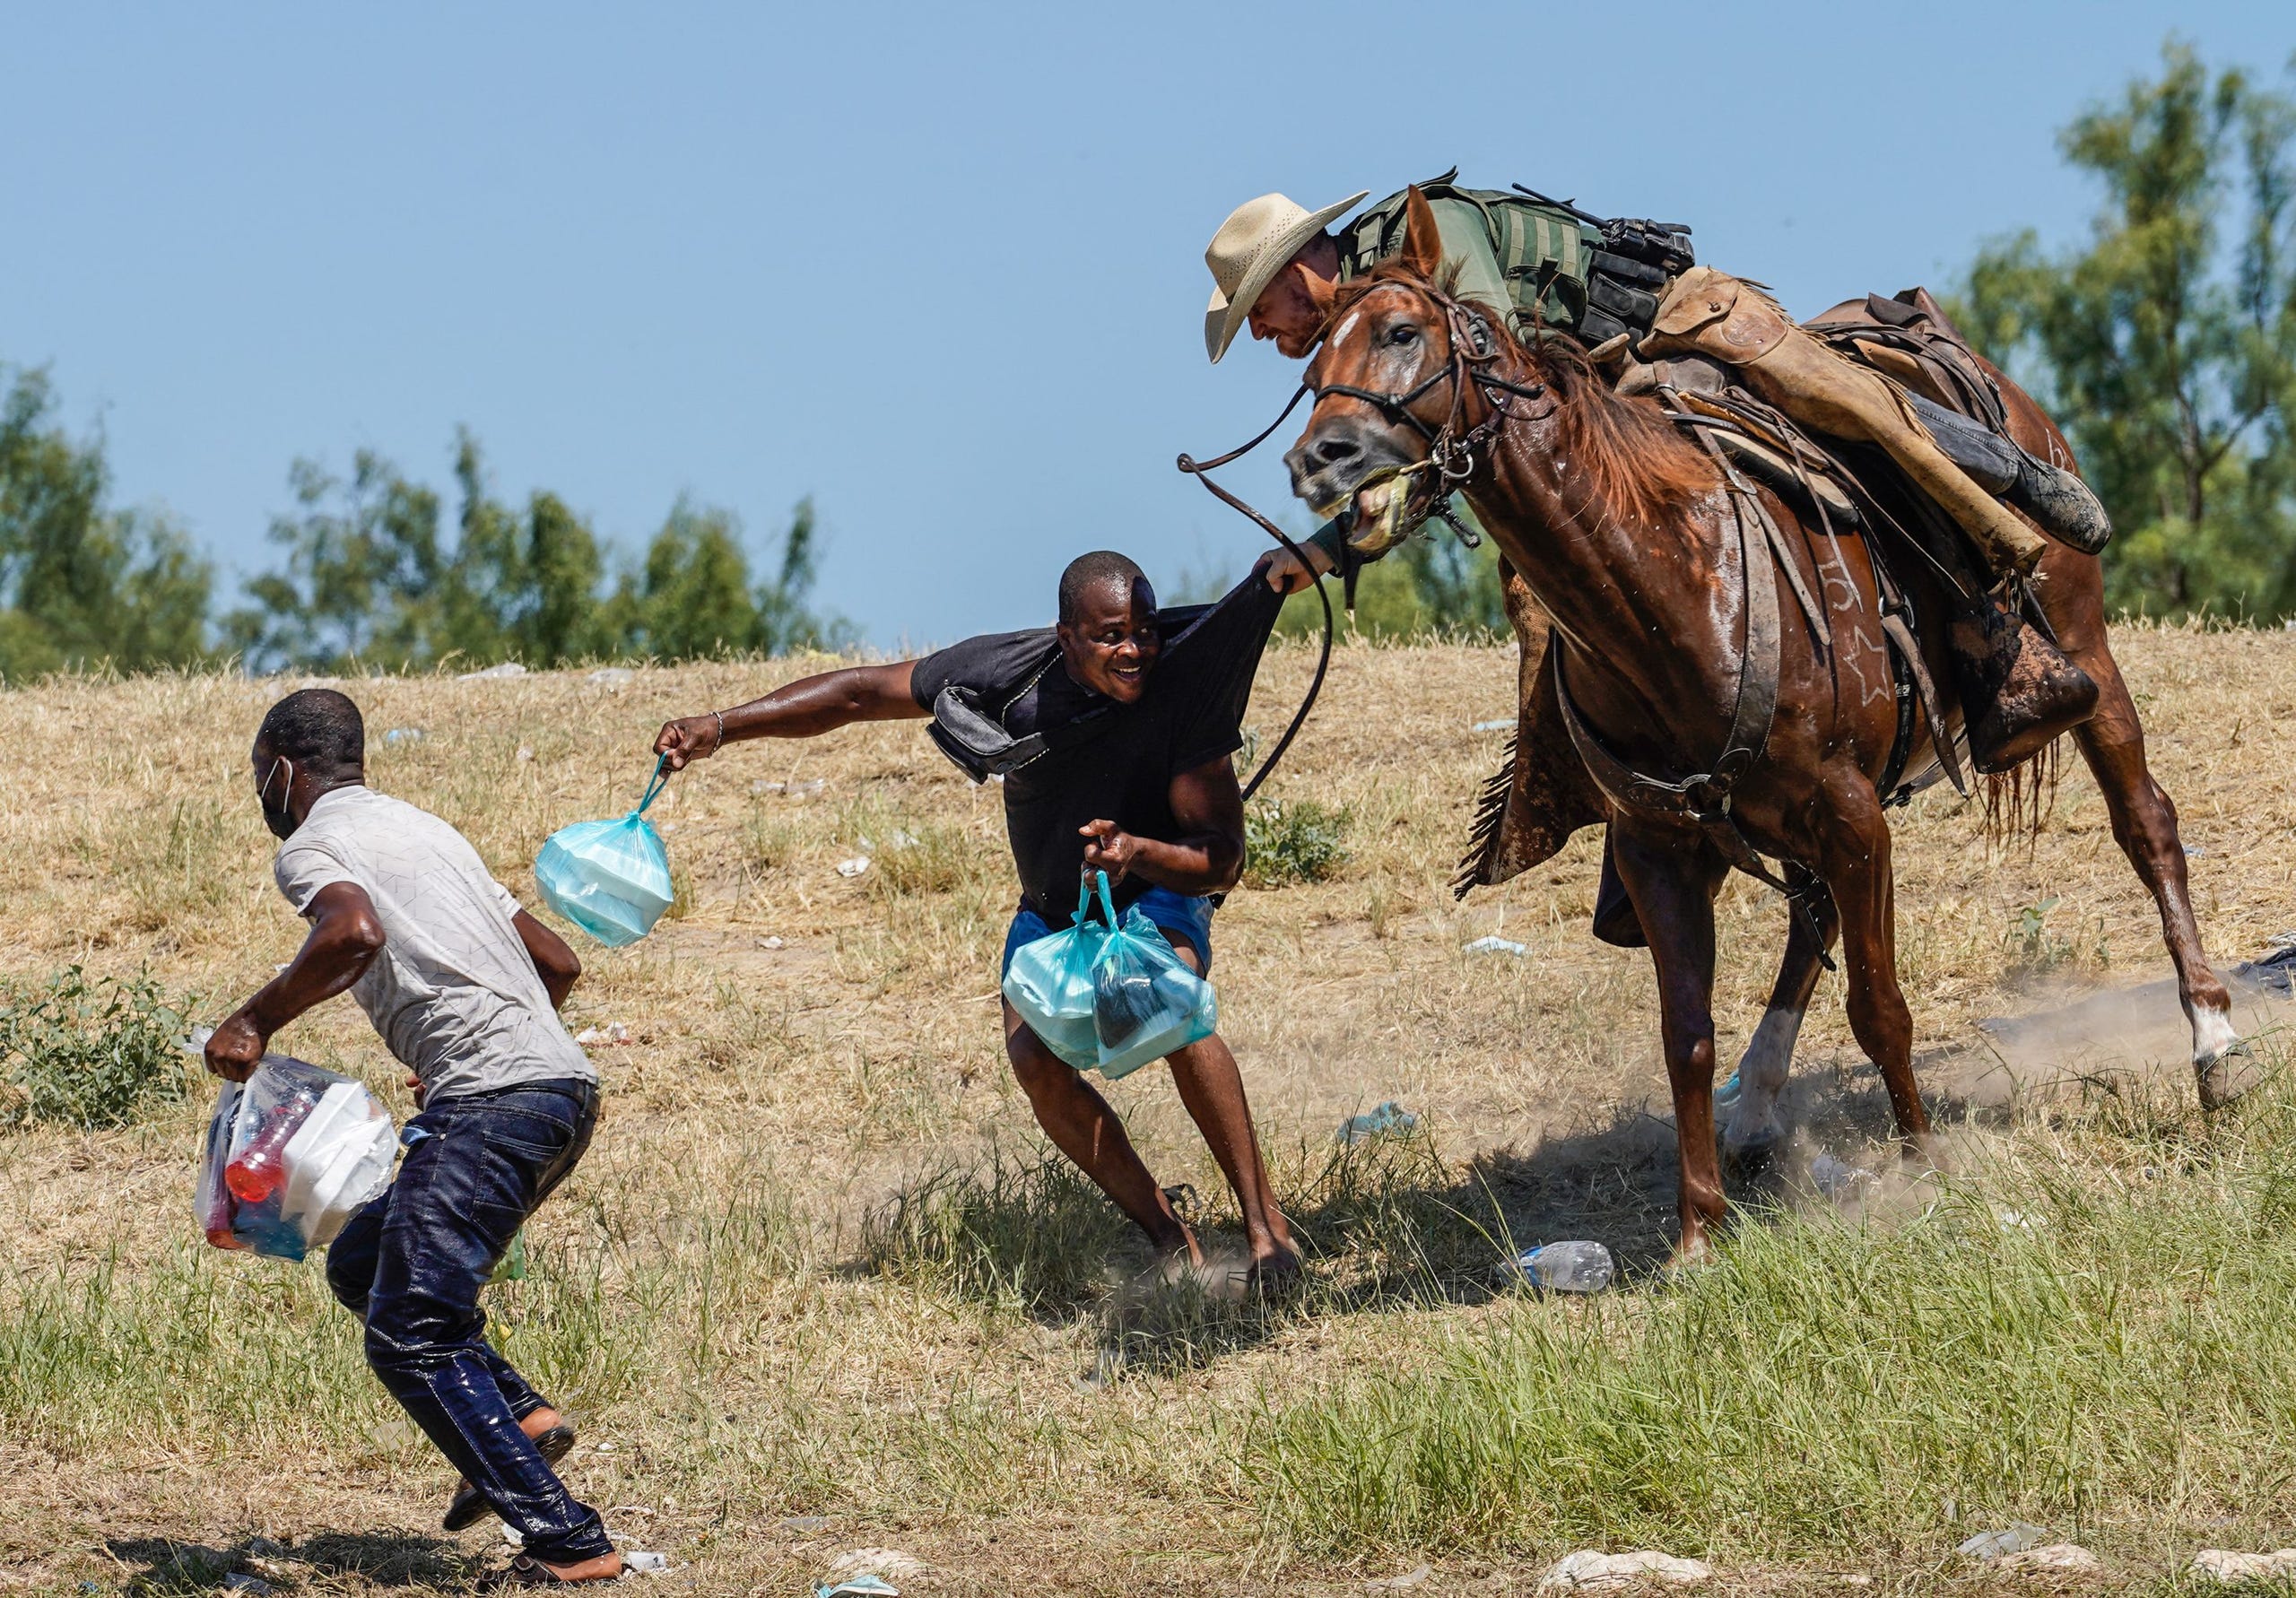 A U.S. Customs and Border Patrol agent on horseback tries to stop a Haitian migrant from entering an encampment on the banks of the Rio Grande in Del Rio, Texas, on Sept. 19, 2021.